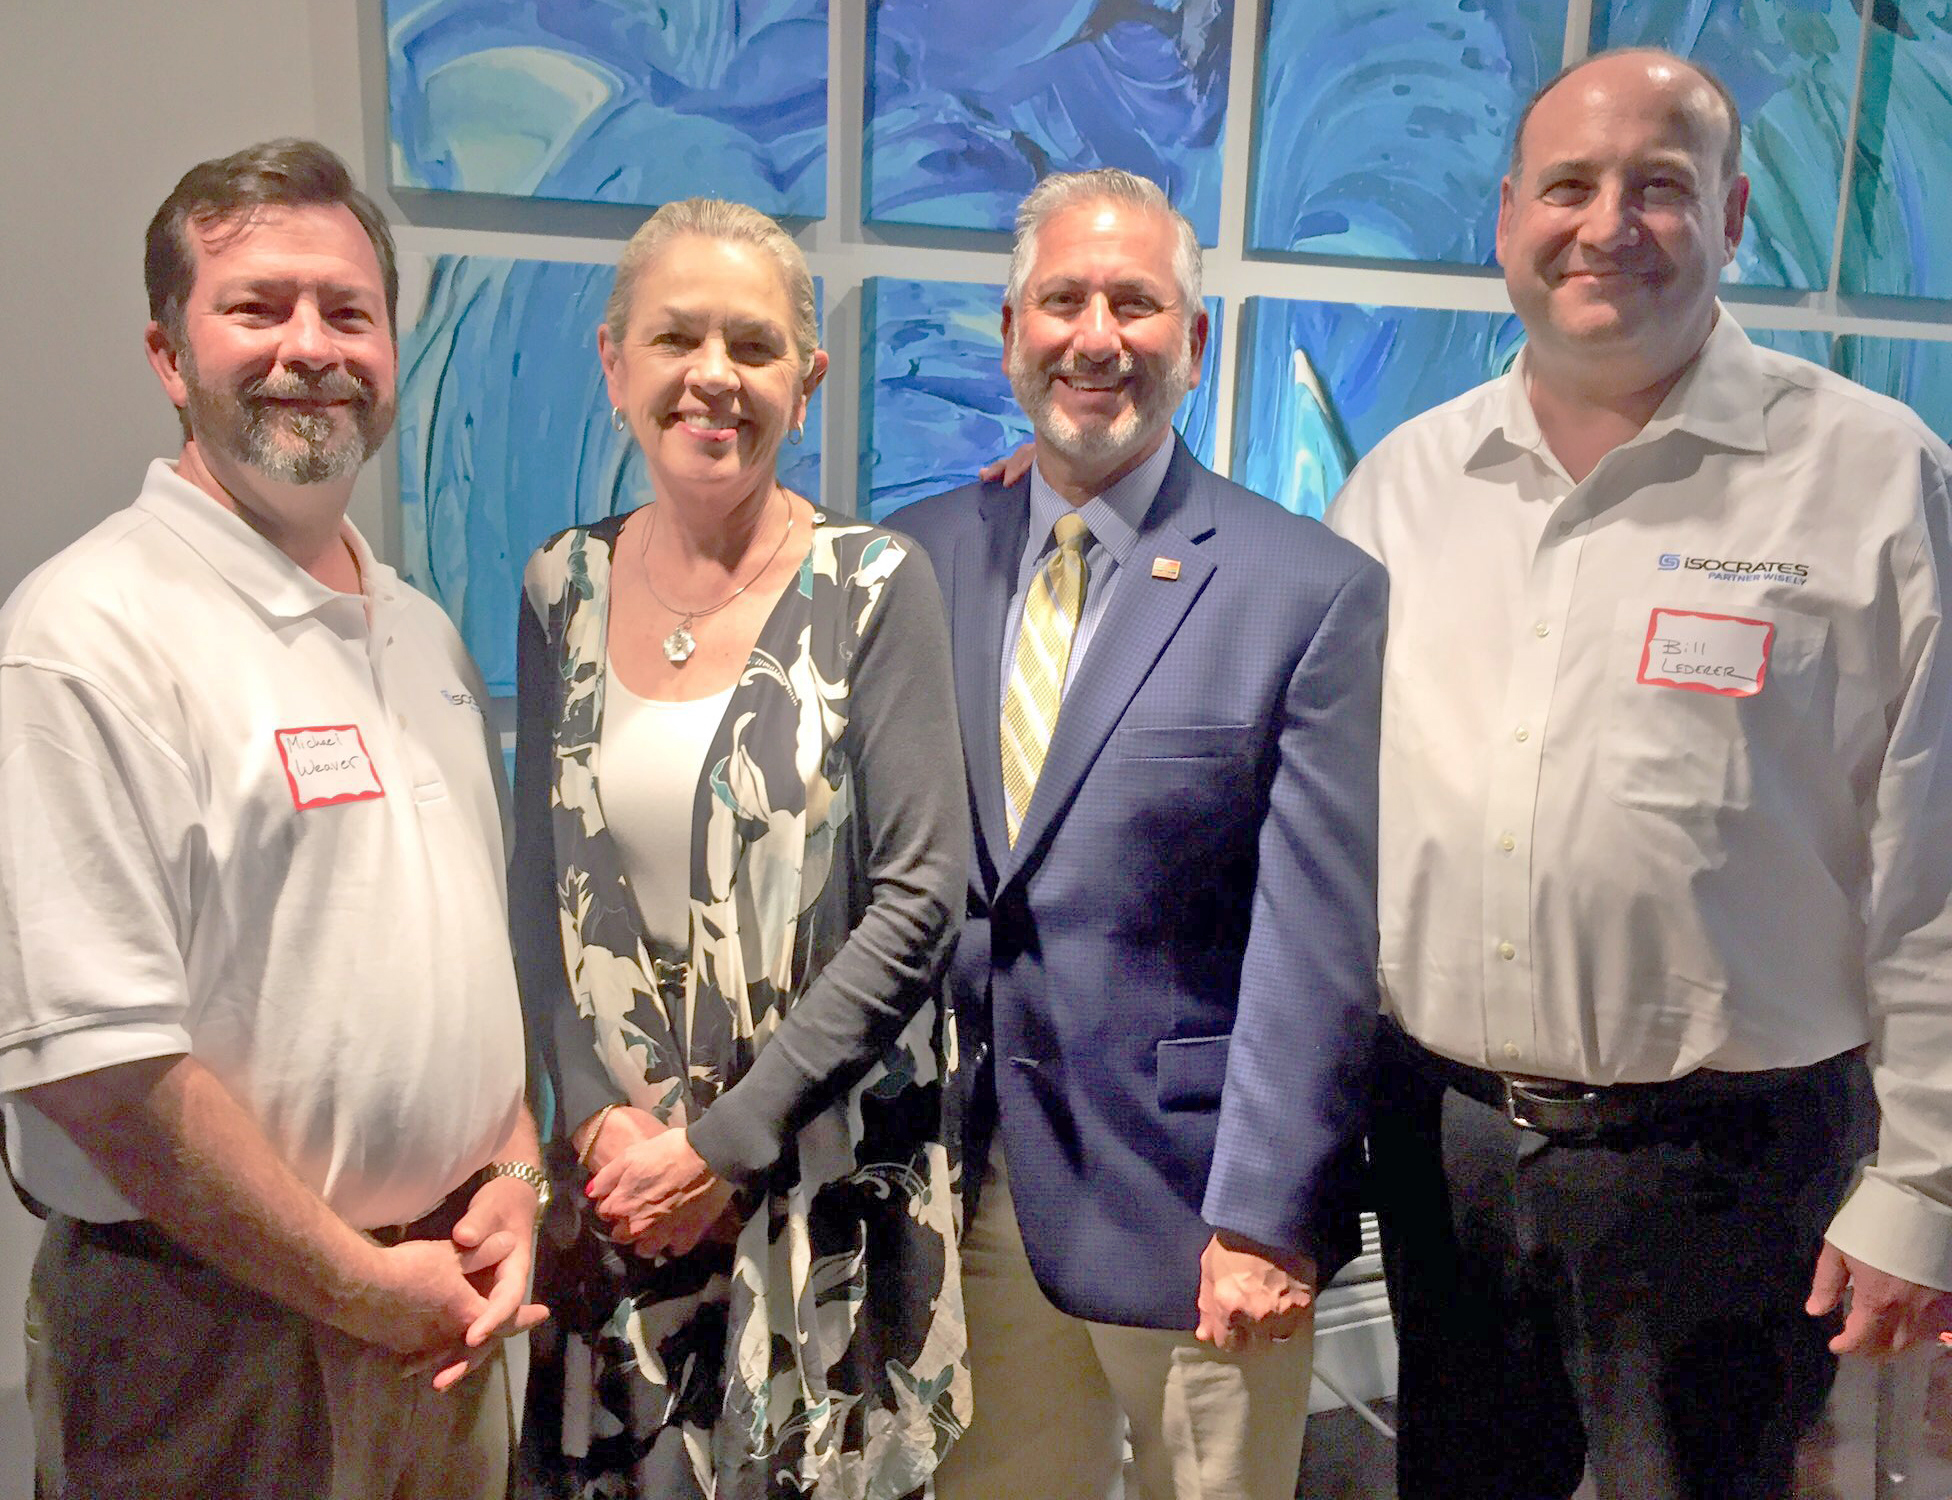 iSocrates executives Michael Weaver, far left, and Bill Lederer, far right, were welcomed to St. Petersburg by Mayor Rick Kriseman and Pinellas County Commissioner Karen Seel. Courtesy photo.